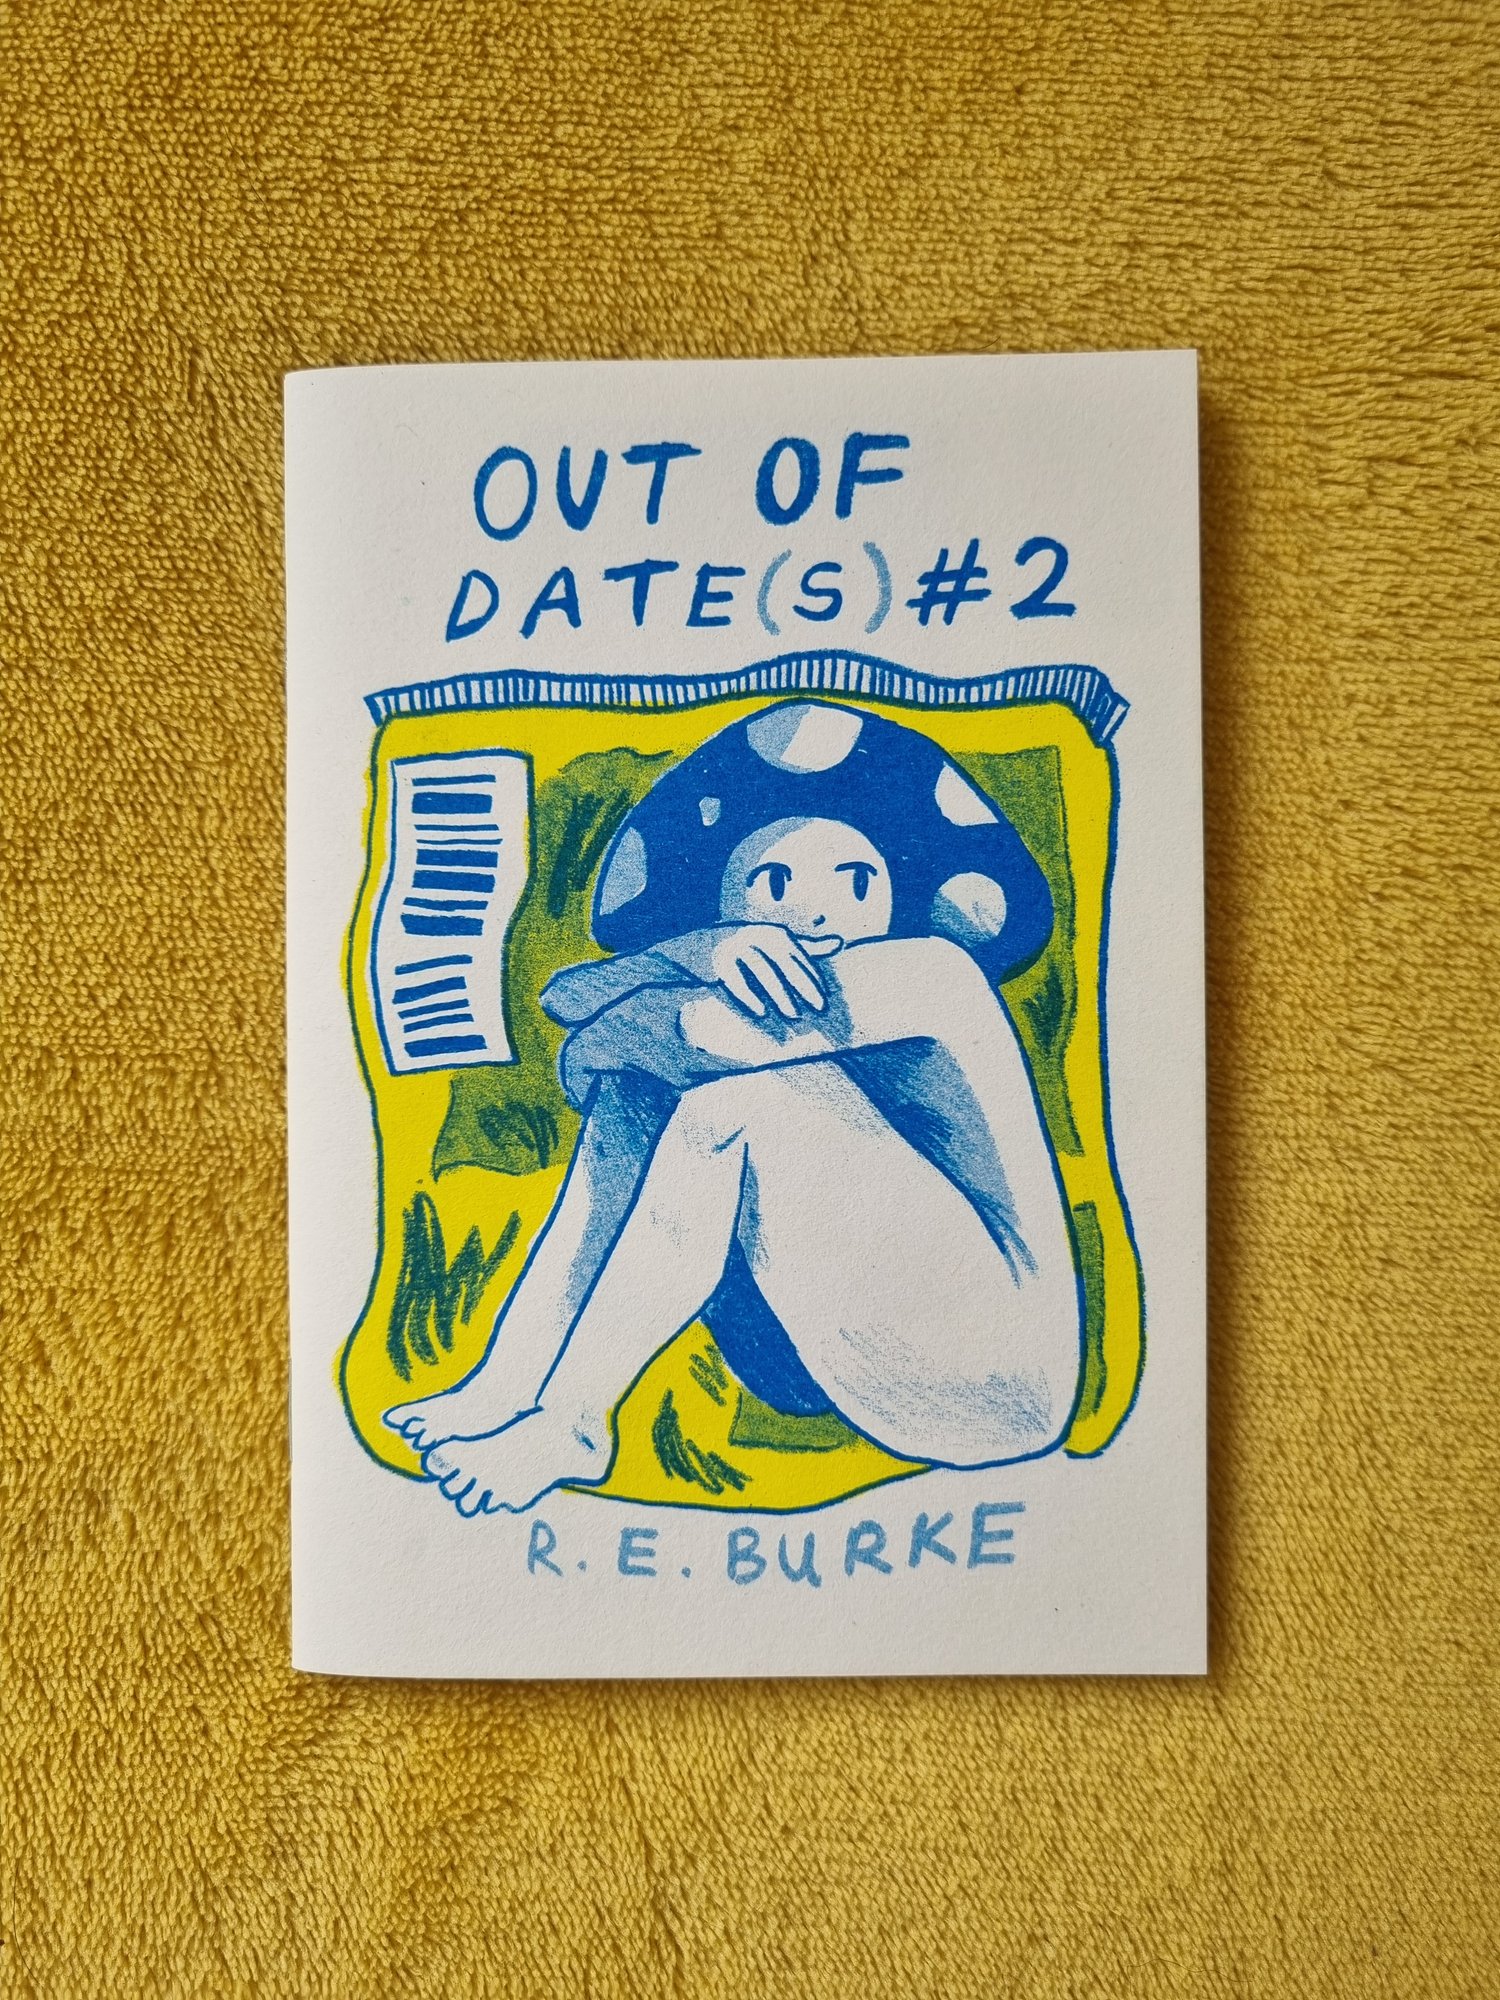 Out of Date(s) #2 - ZINE